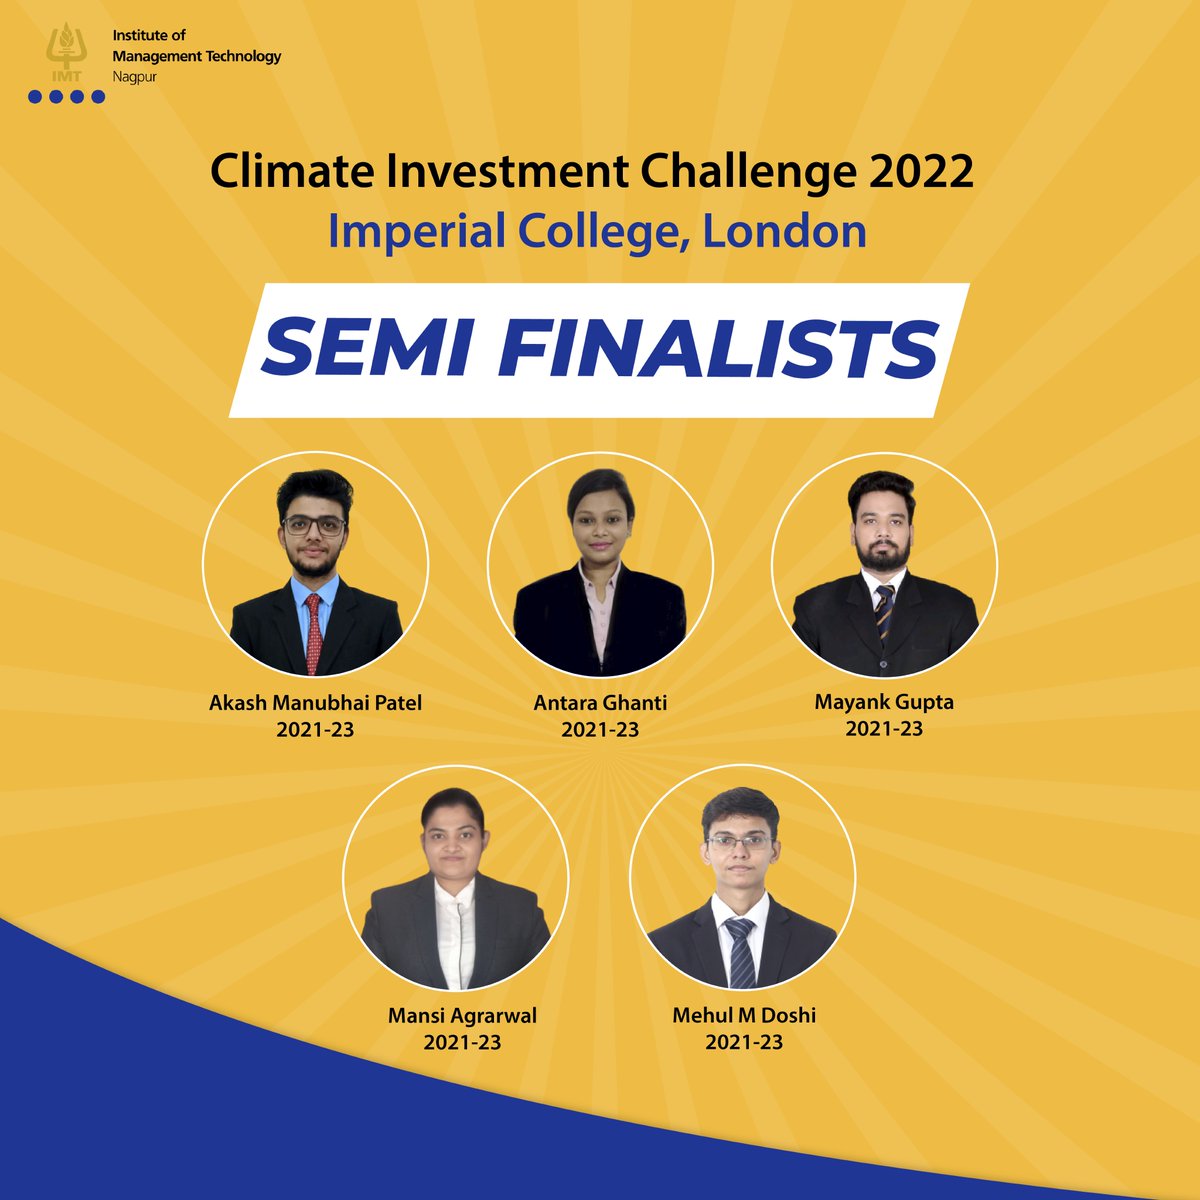 #IMTNagpur congratulates the students on qualifying for the semi-finals of the #ClimateInvestmentChallenge 2022, organized by the #ImperialCollege, #London, and wishes them luck for the upcoming rounds. 
#TheIMTNExperience